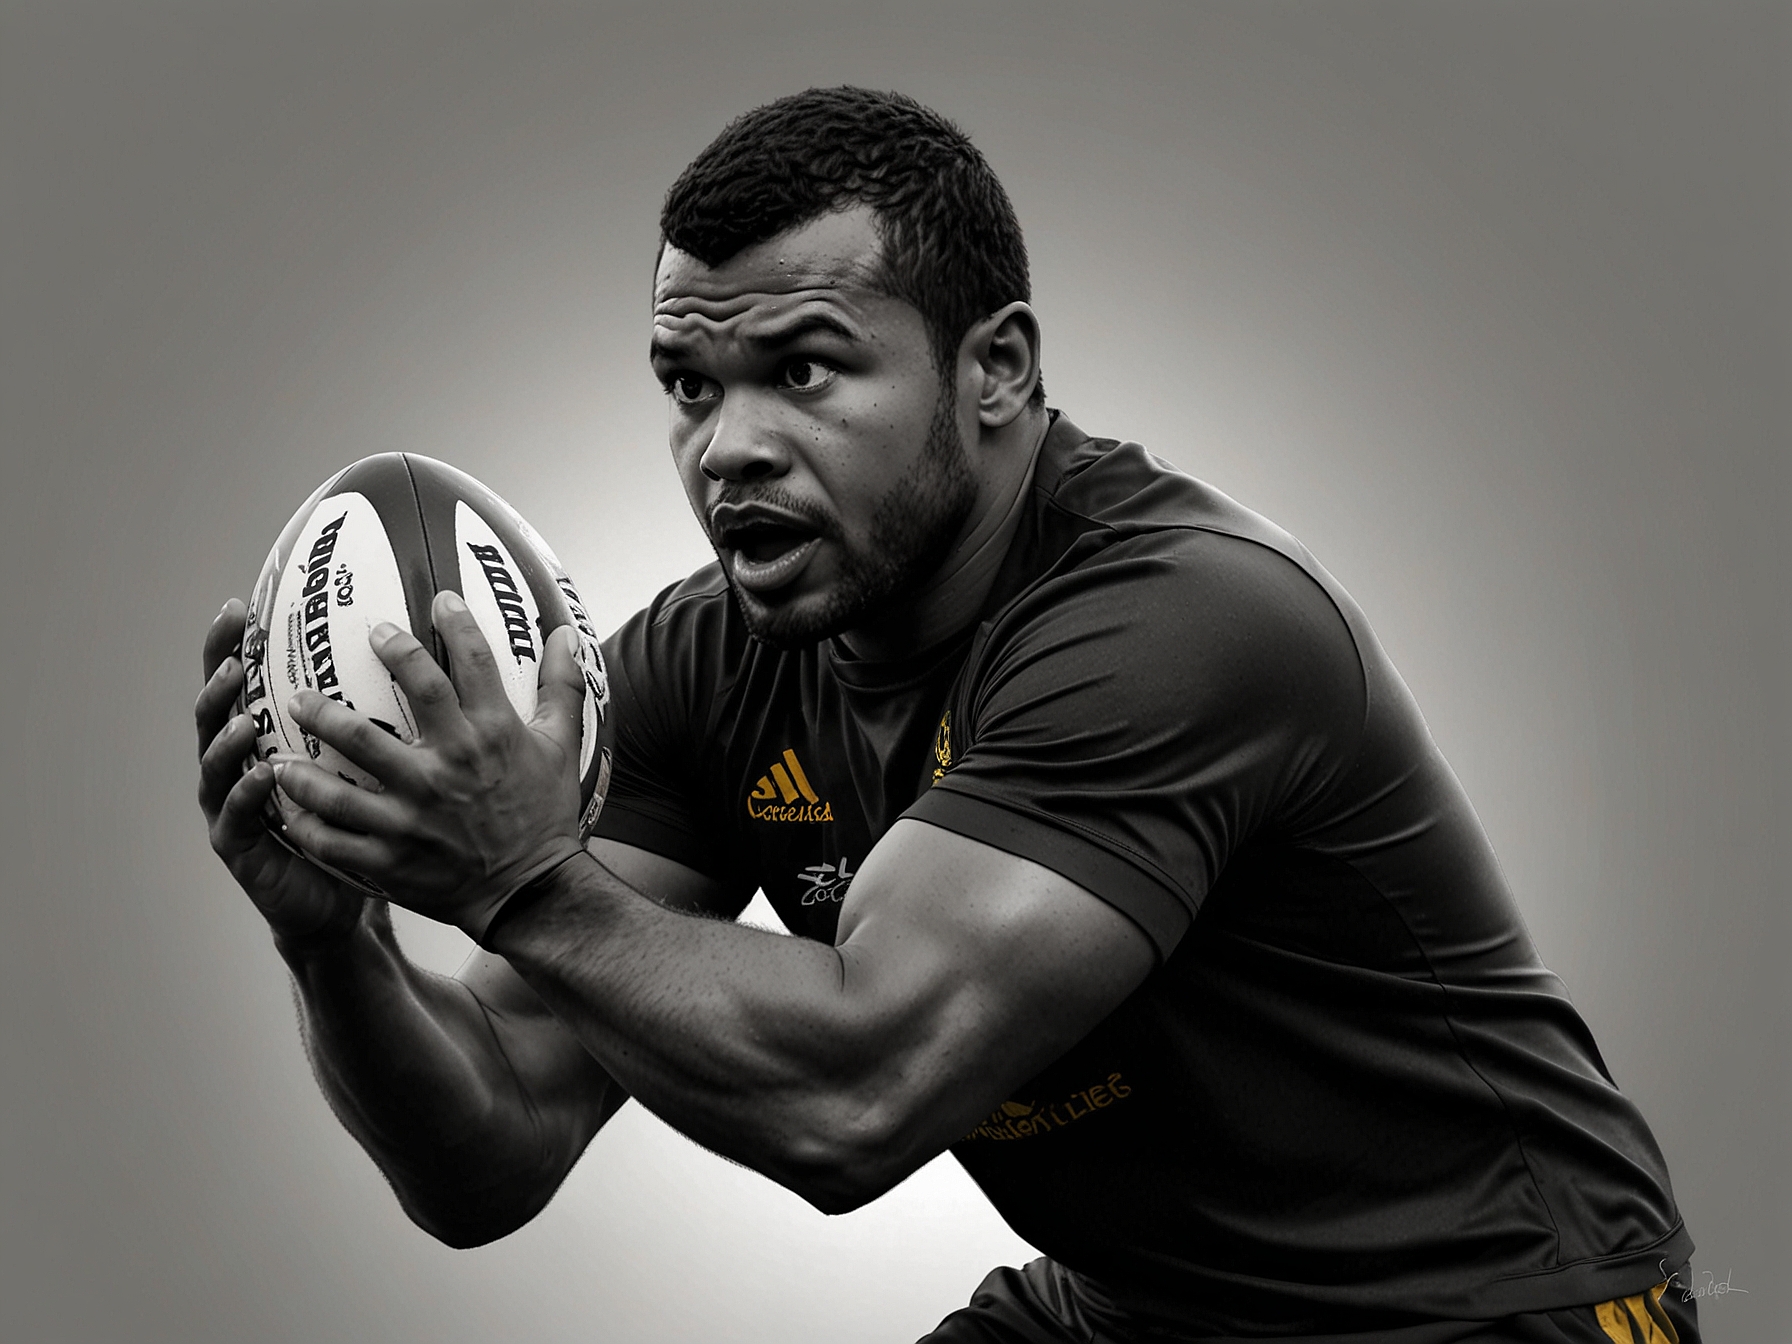 Kurtley Beale in action during a training session, showcasing his versatility and skills that make him a valuable addition to the Wallabies squad for the upcoming Tests against Wales and Georgia.